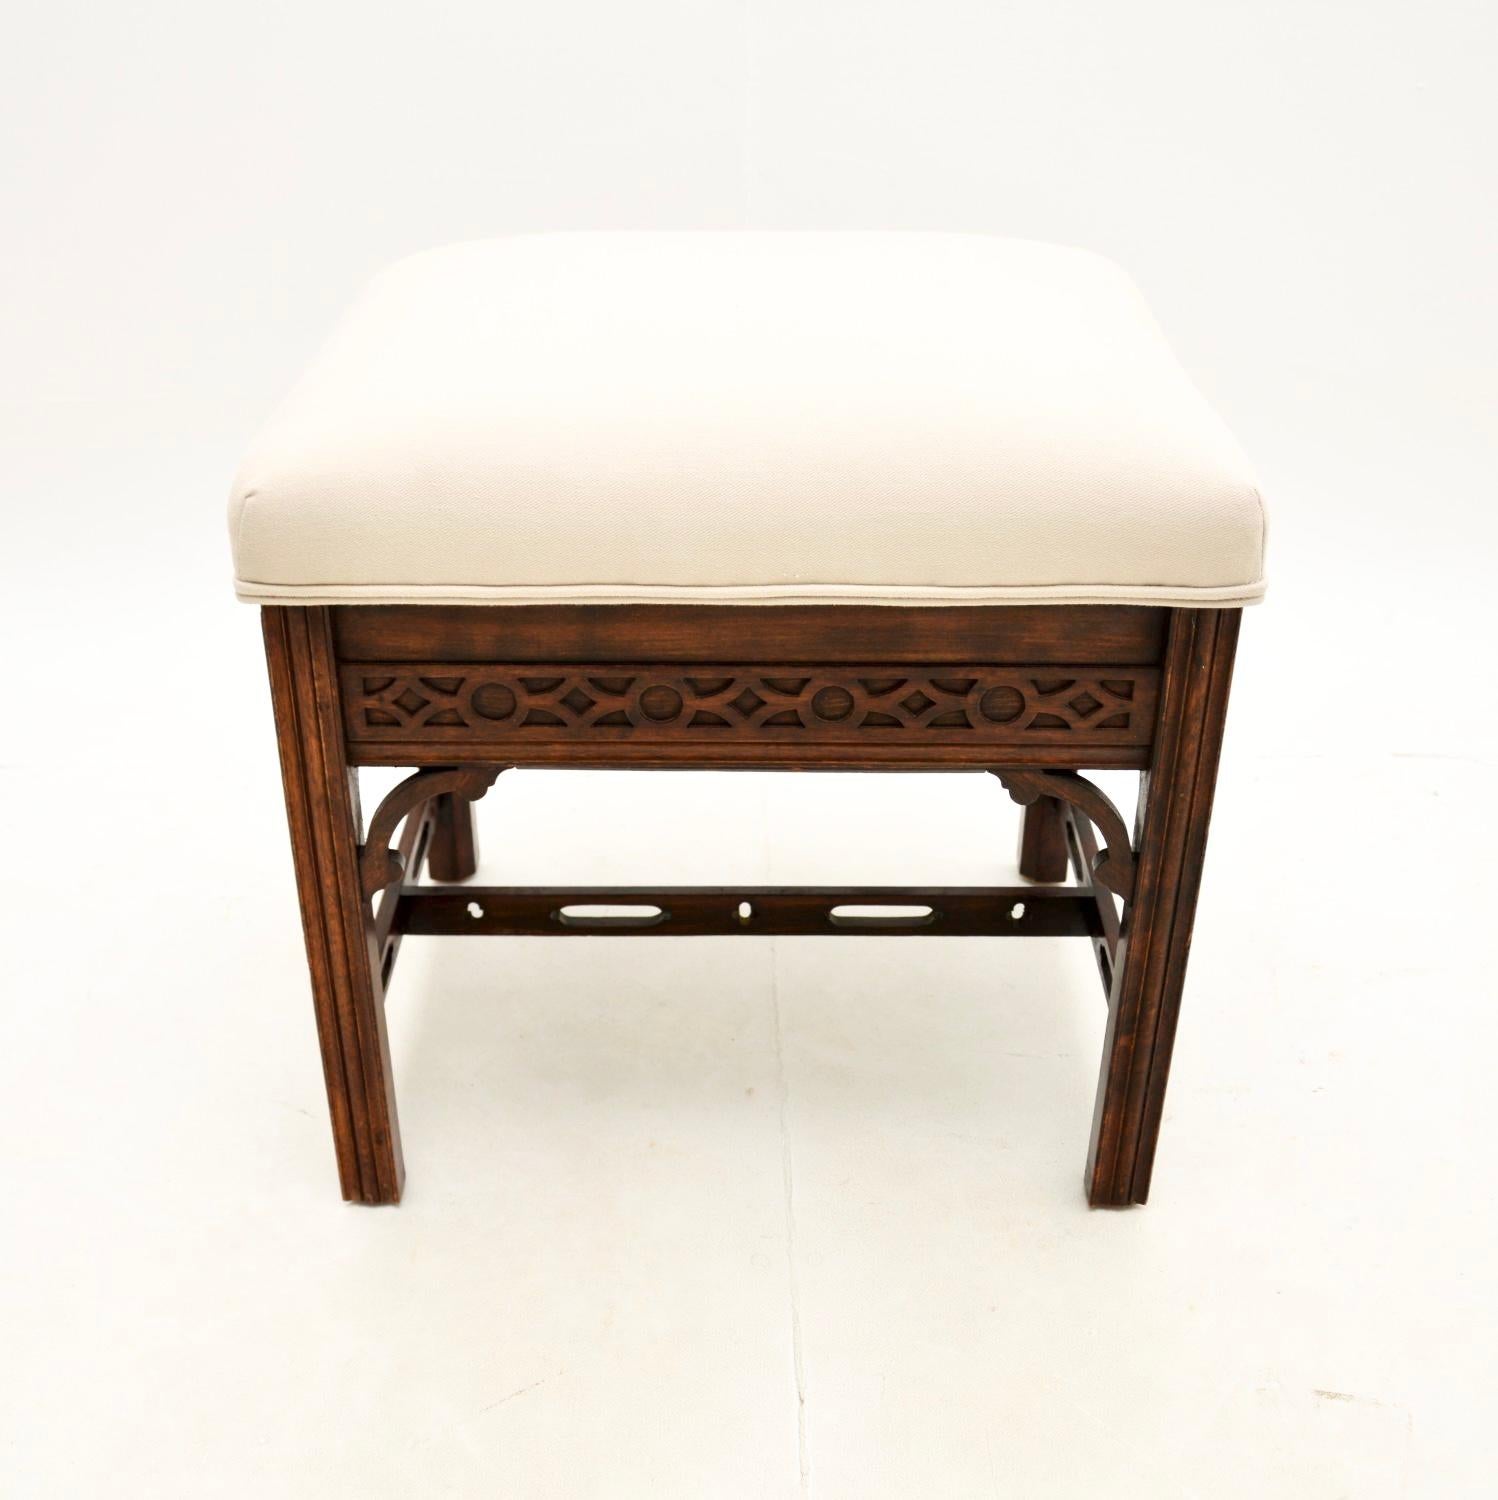 A smart and extremely well made antique Chippendale Style piano stool. This was made in England, it dates from around the 1890-1900 period.

It is of fine quality, the frame has beautiful carving, pierced fretwork under the corners and a pierced